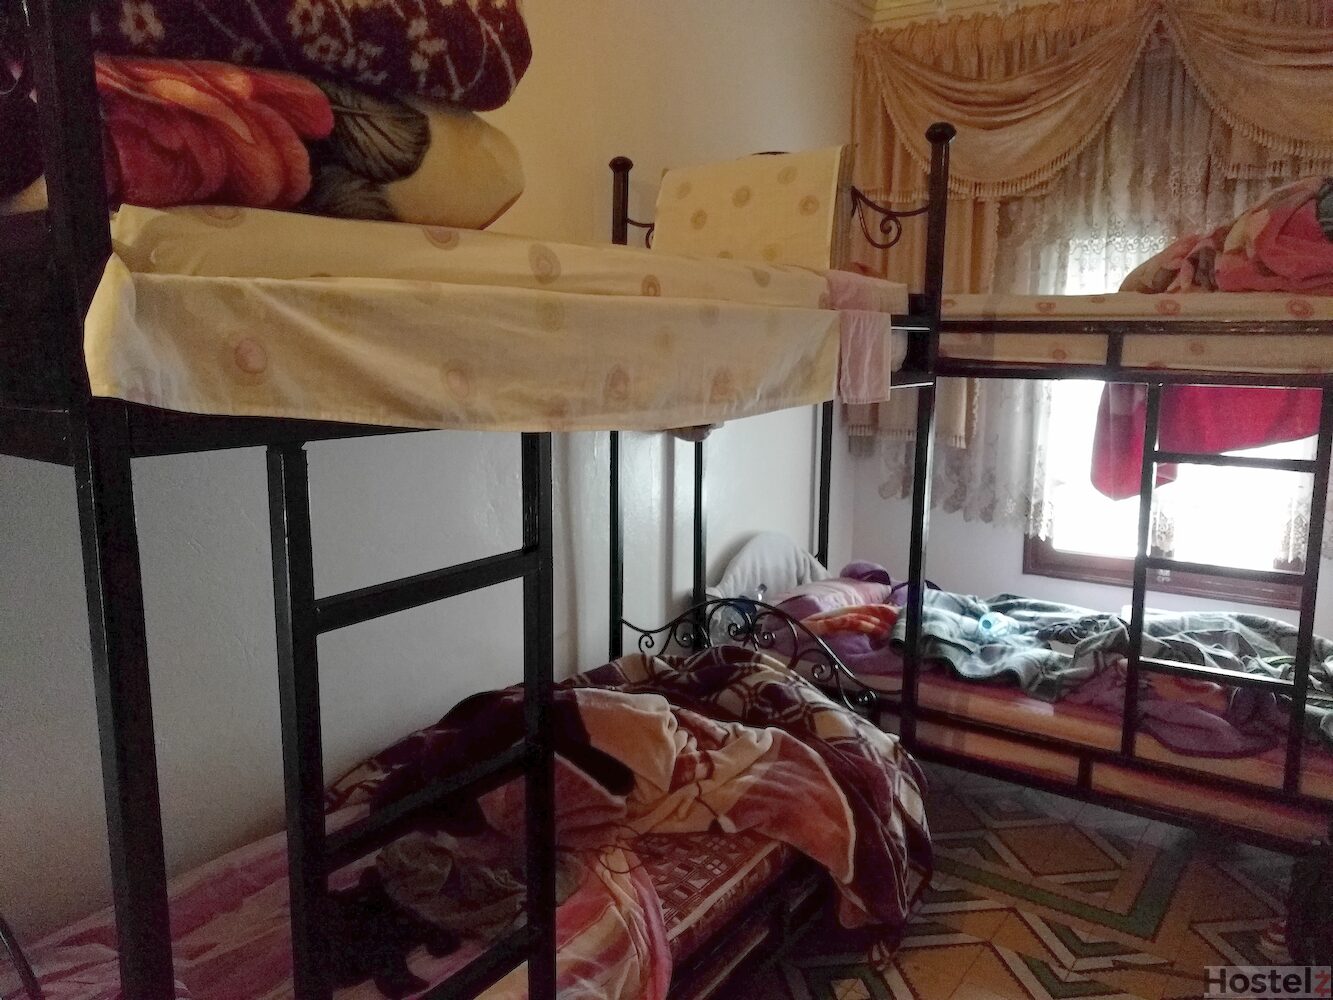 The eight-bed dorm. Two blankets provided for the cold winter nights.